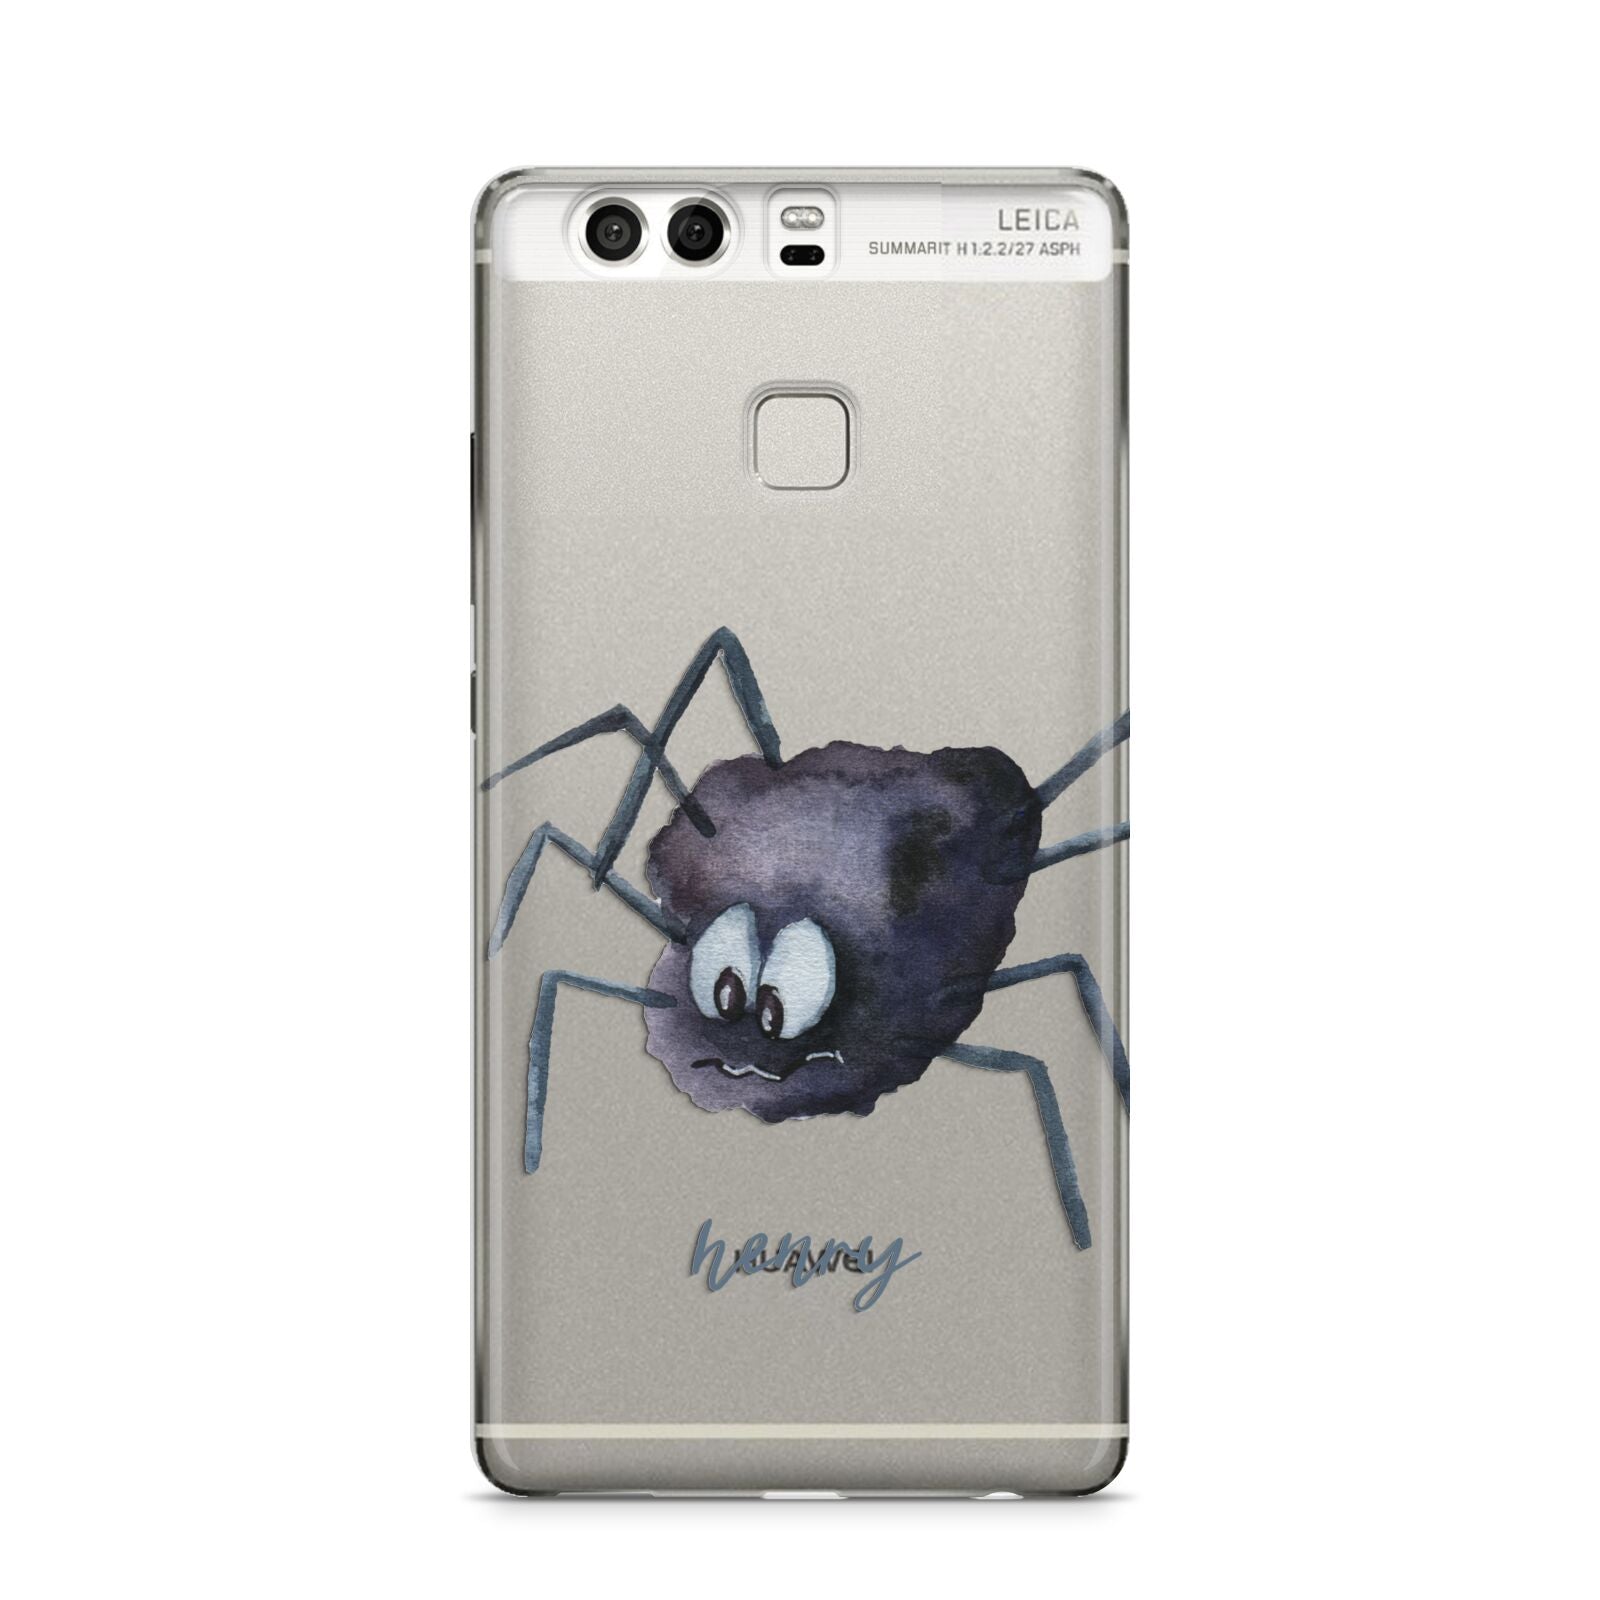 Scared Spider Personalised Huawei P9 Case